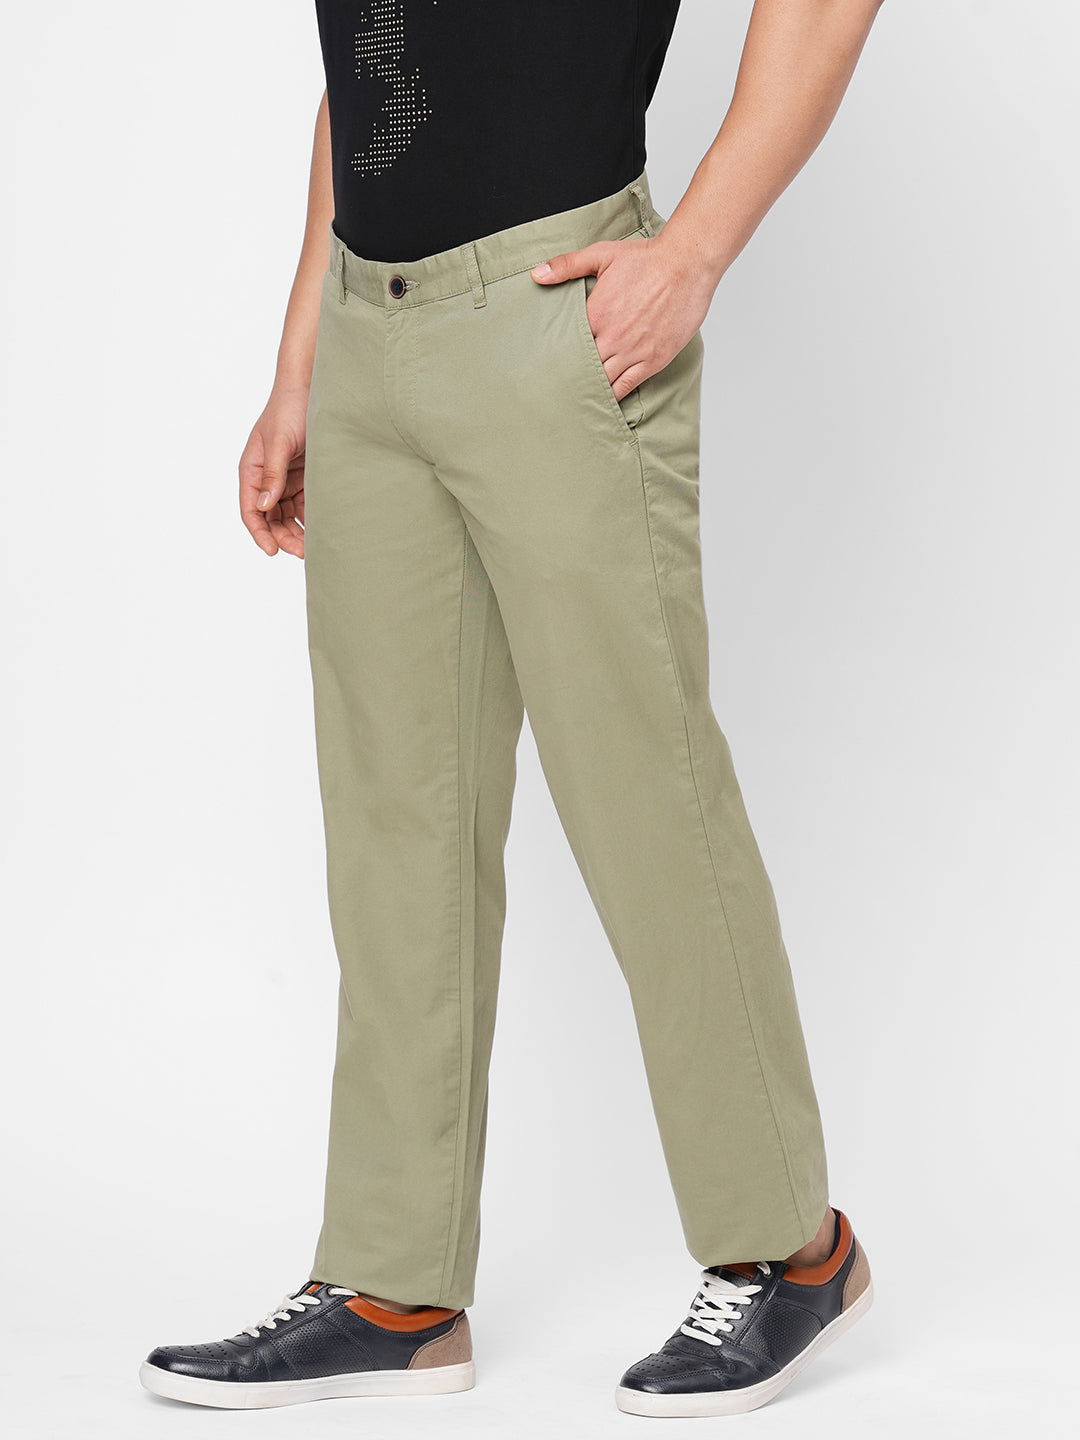 Men Chinos Premium Quality Branded Cotton Pants at Rs 285/piece in Ahmedabad